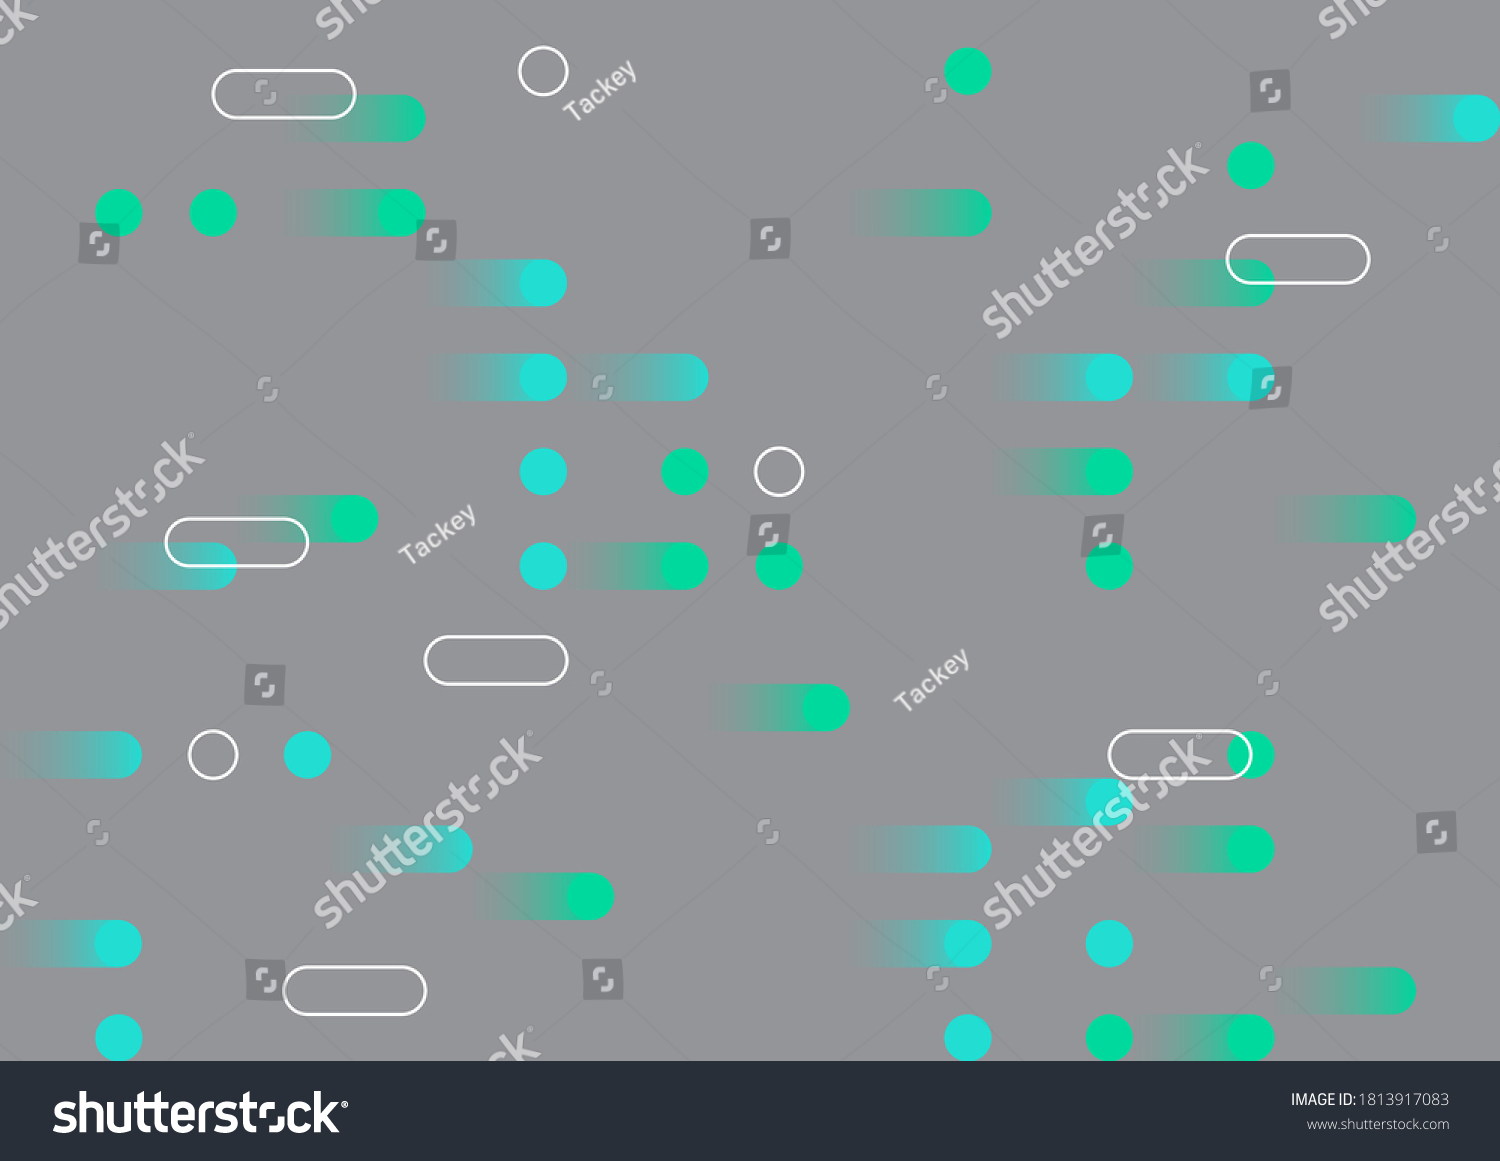 SVG of Digital Morse Code Background. Digital dots and dash with green and blue color design in the Morse code style show dynamic from data connection through network connection pipeline or fiber optic. svg